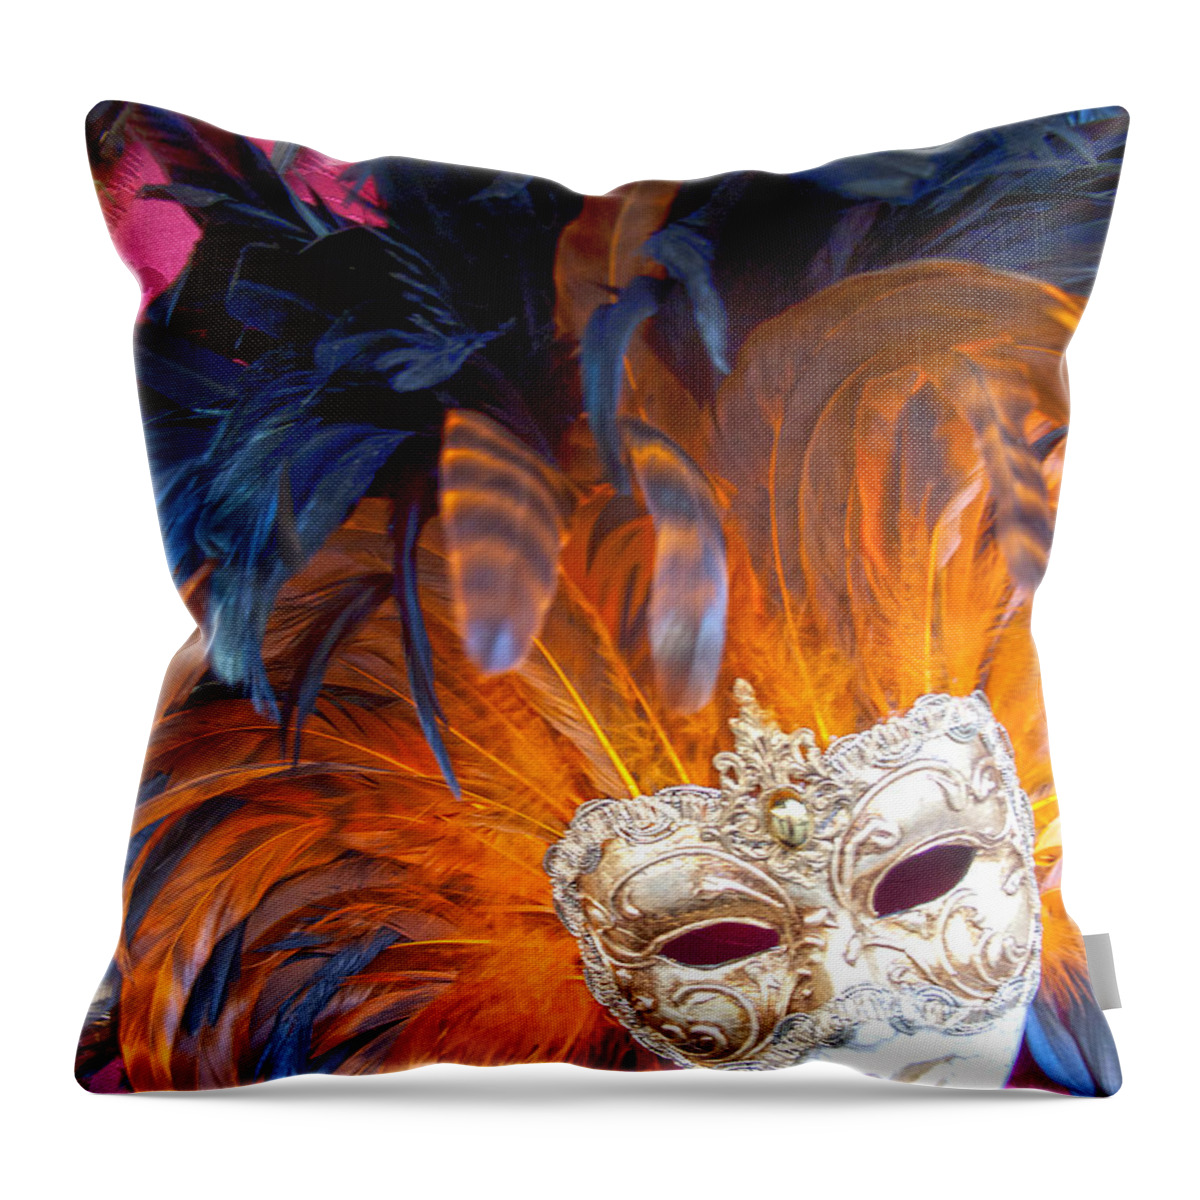 Mask Throw Pillow featuring the photograph Venetian Face Mask by Heiko Koehrer-Wagner